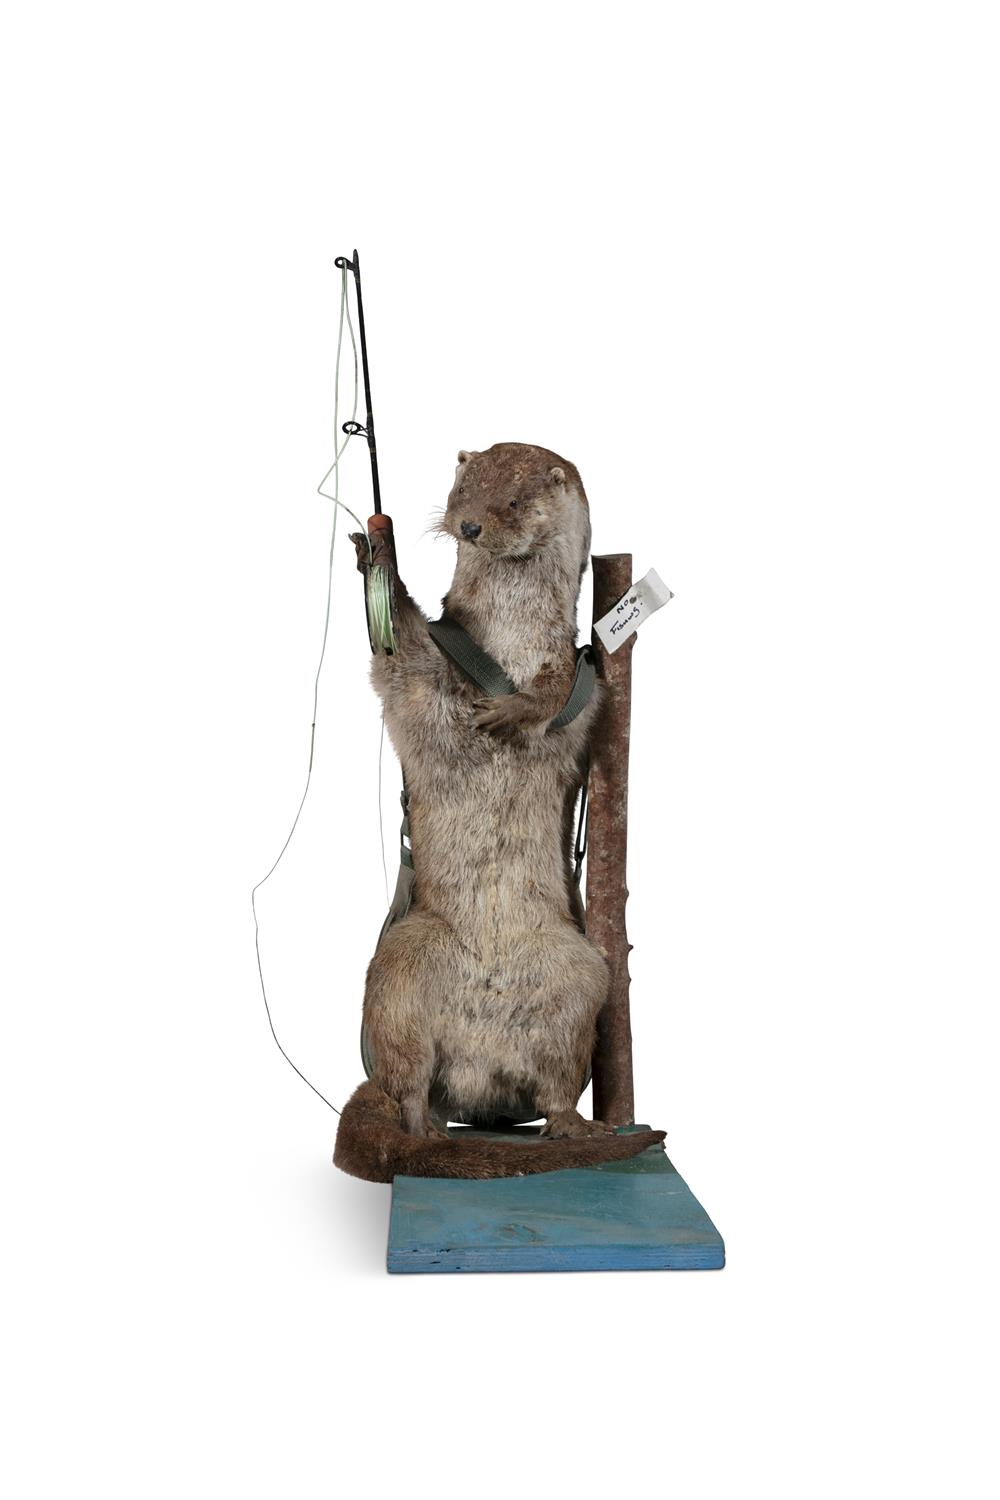 TAXIDERMY An anthropomorphic otter, displayed standing in an upright position as a fisherman with